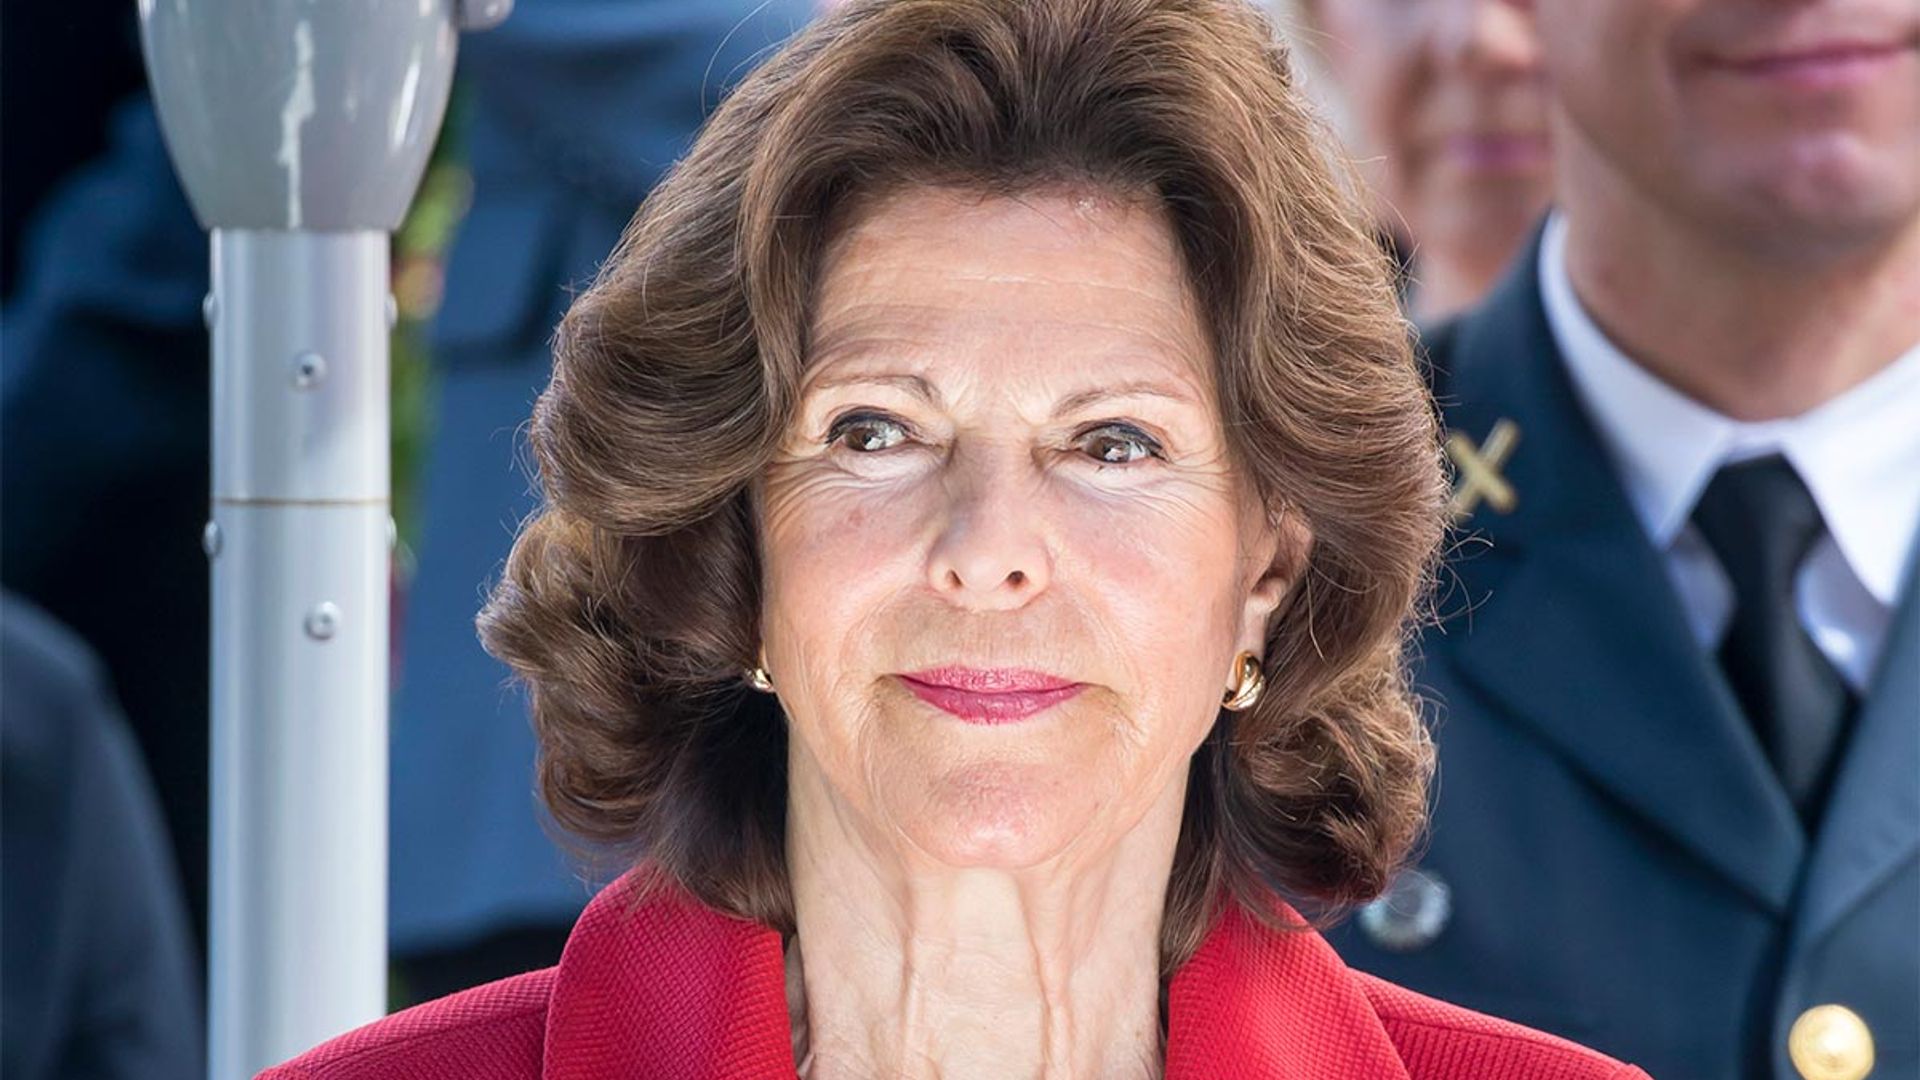 Queen Silvia of Sweden feels 'great sadness' as she mourns the loss of her brother